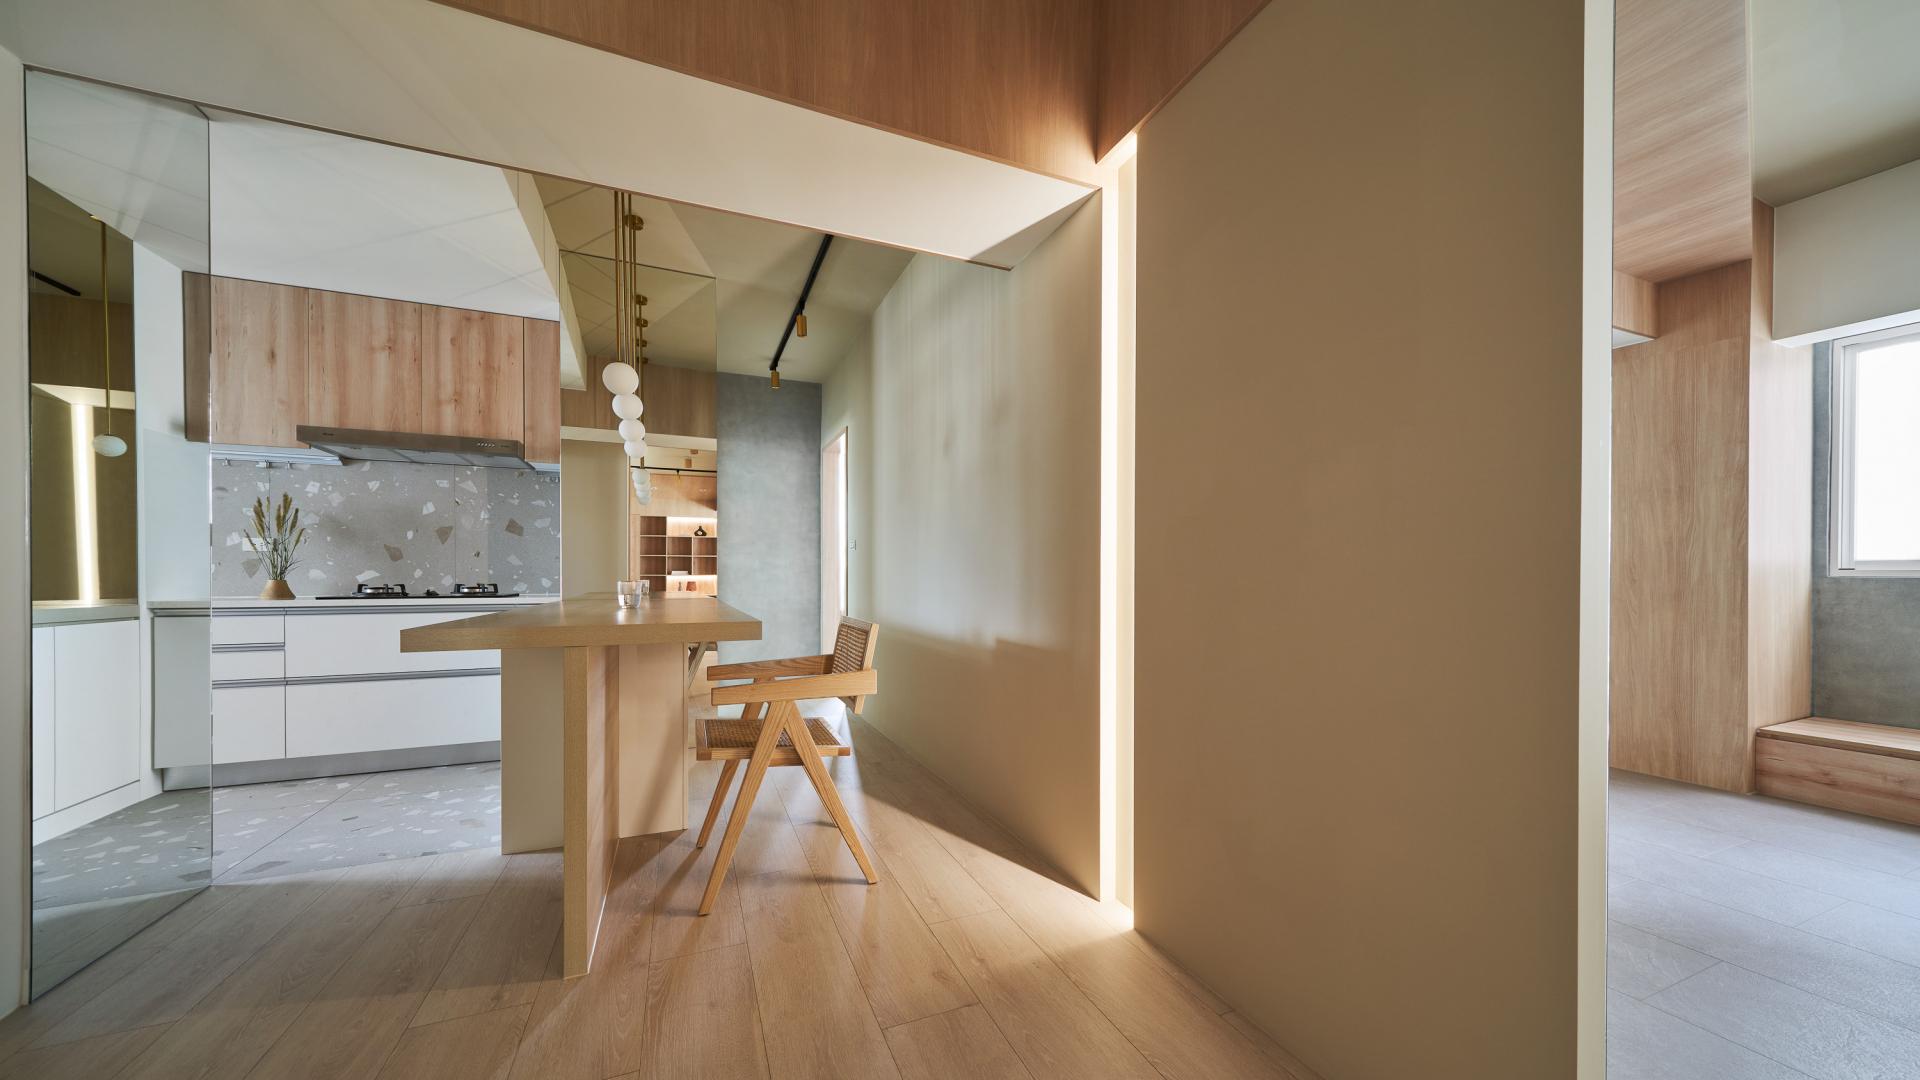 This 1,173 sq. ft. house in Taipei floats in fluidity